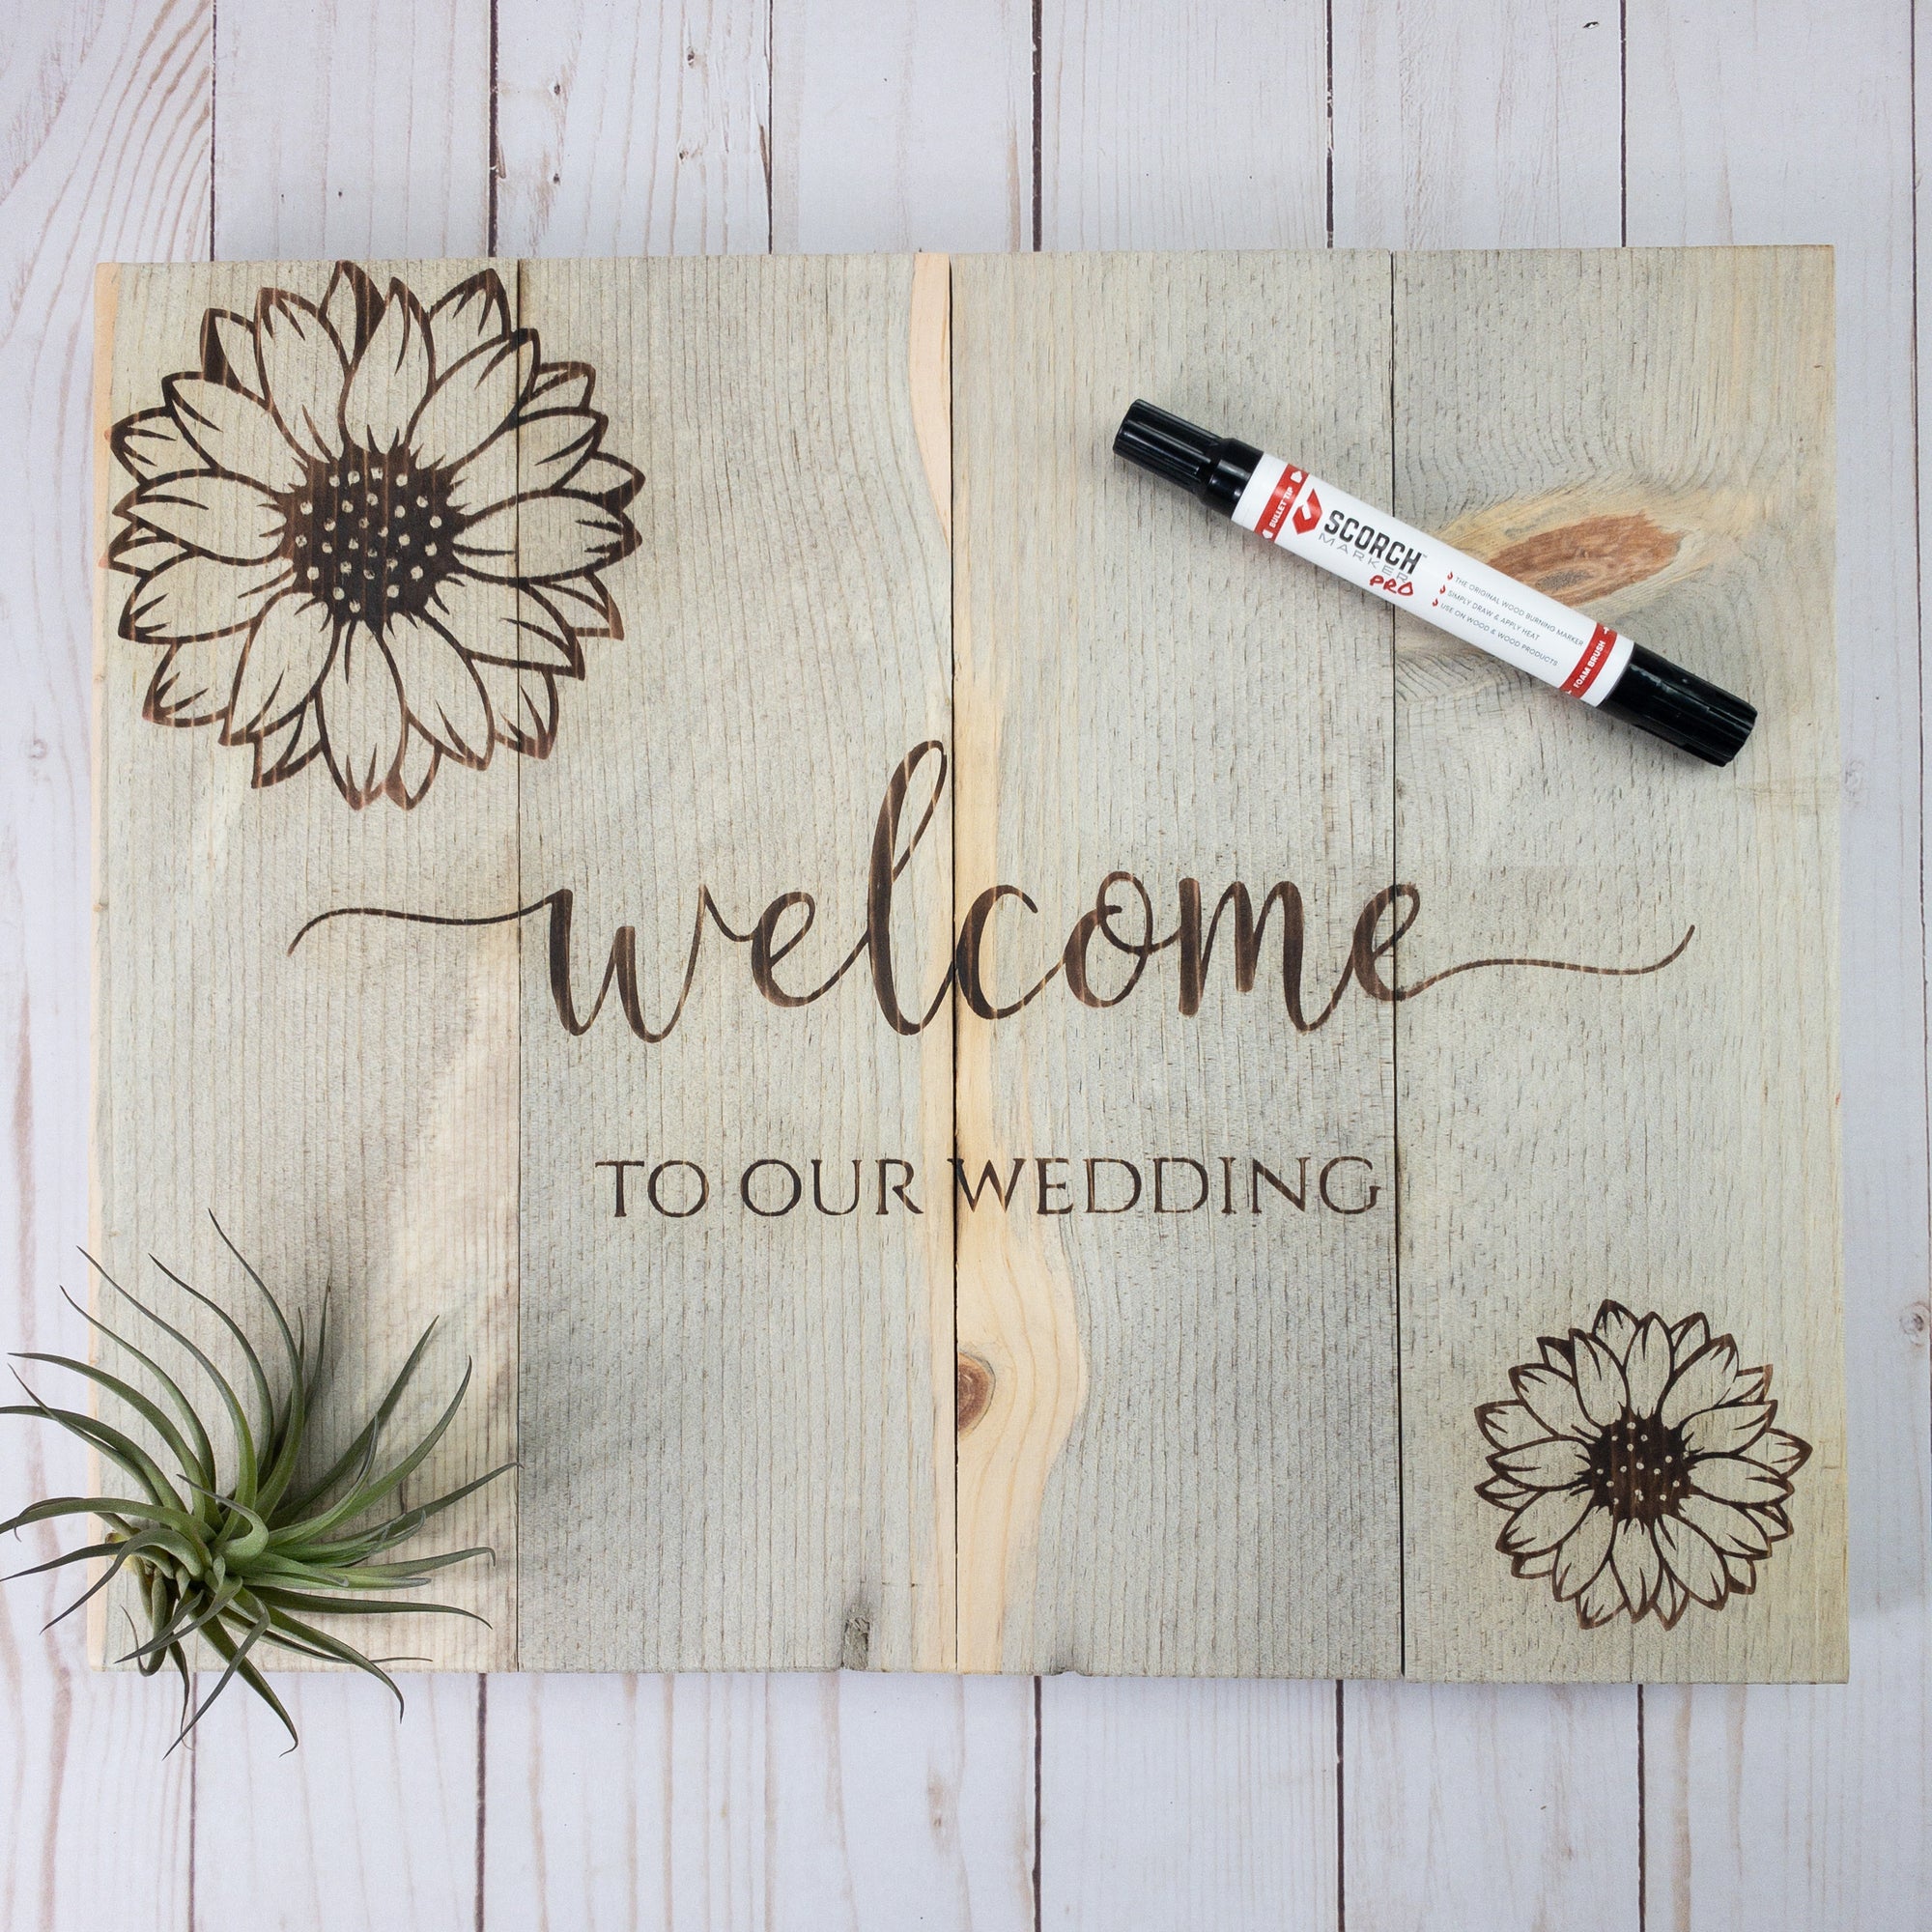 How to Wood Burn Your Own Wedding Sign - Scorch Marker